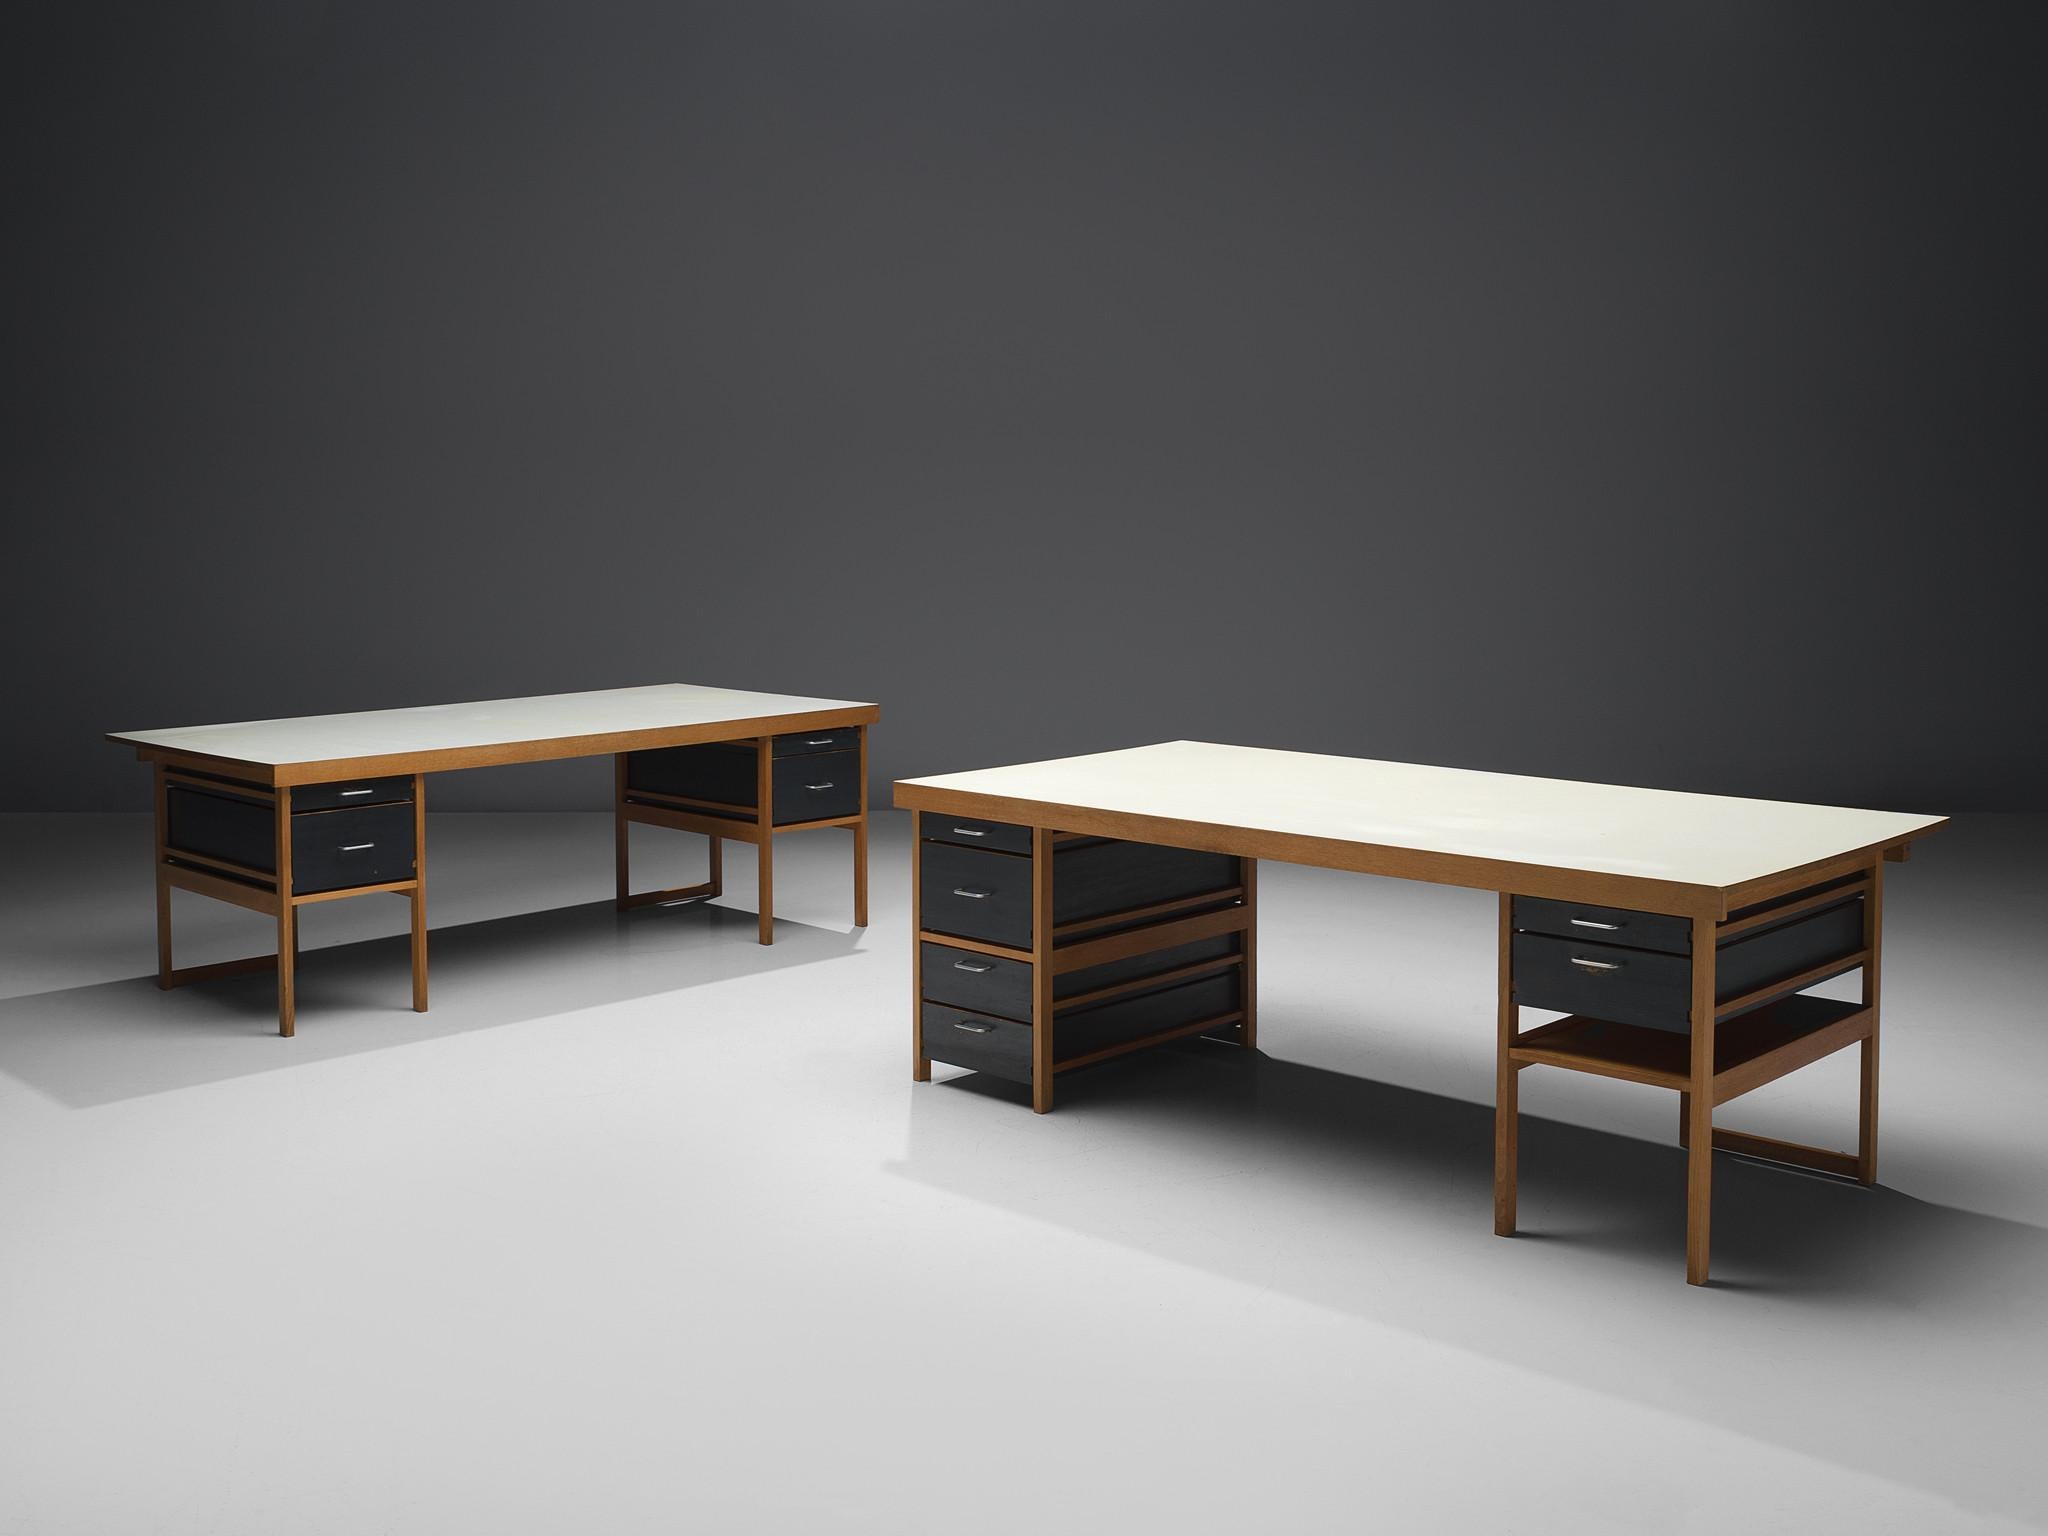 Desk Benedikt Rohner for Oswald, oak and lacquered wood, Switzerland, 1965

This desk in natural and lacquered oak is designed by the Swiss designer Benedikt Rohner for Oswald, 1965. The most interesting thing about this desk is its open